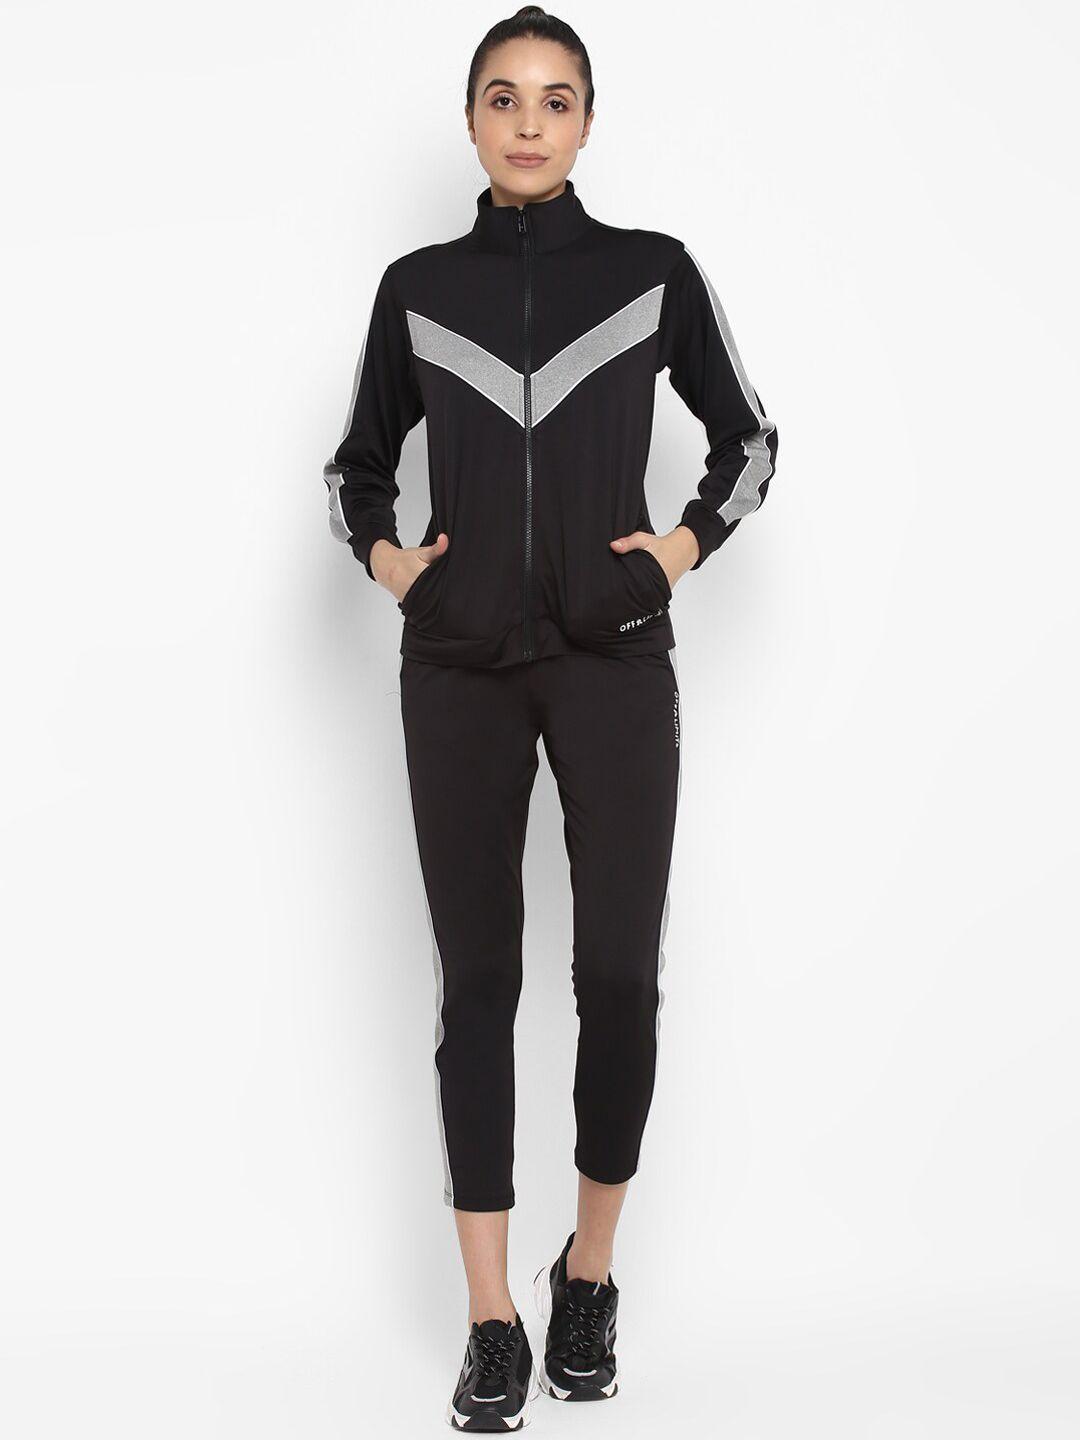 off-limits-women-black-&-grey-colorblocked-tracksuit